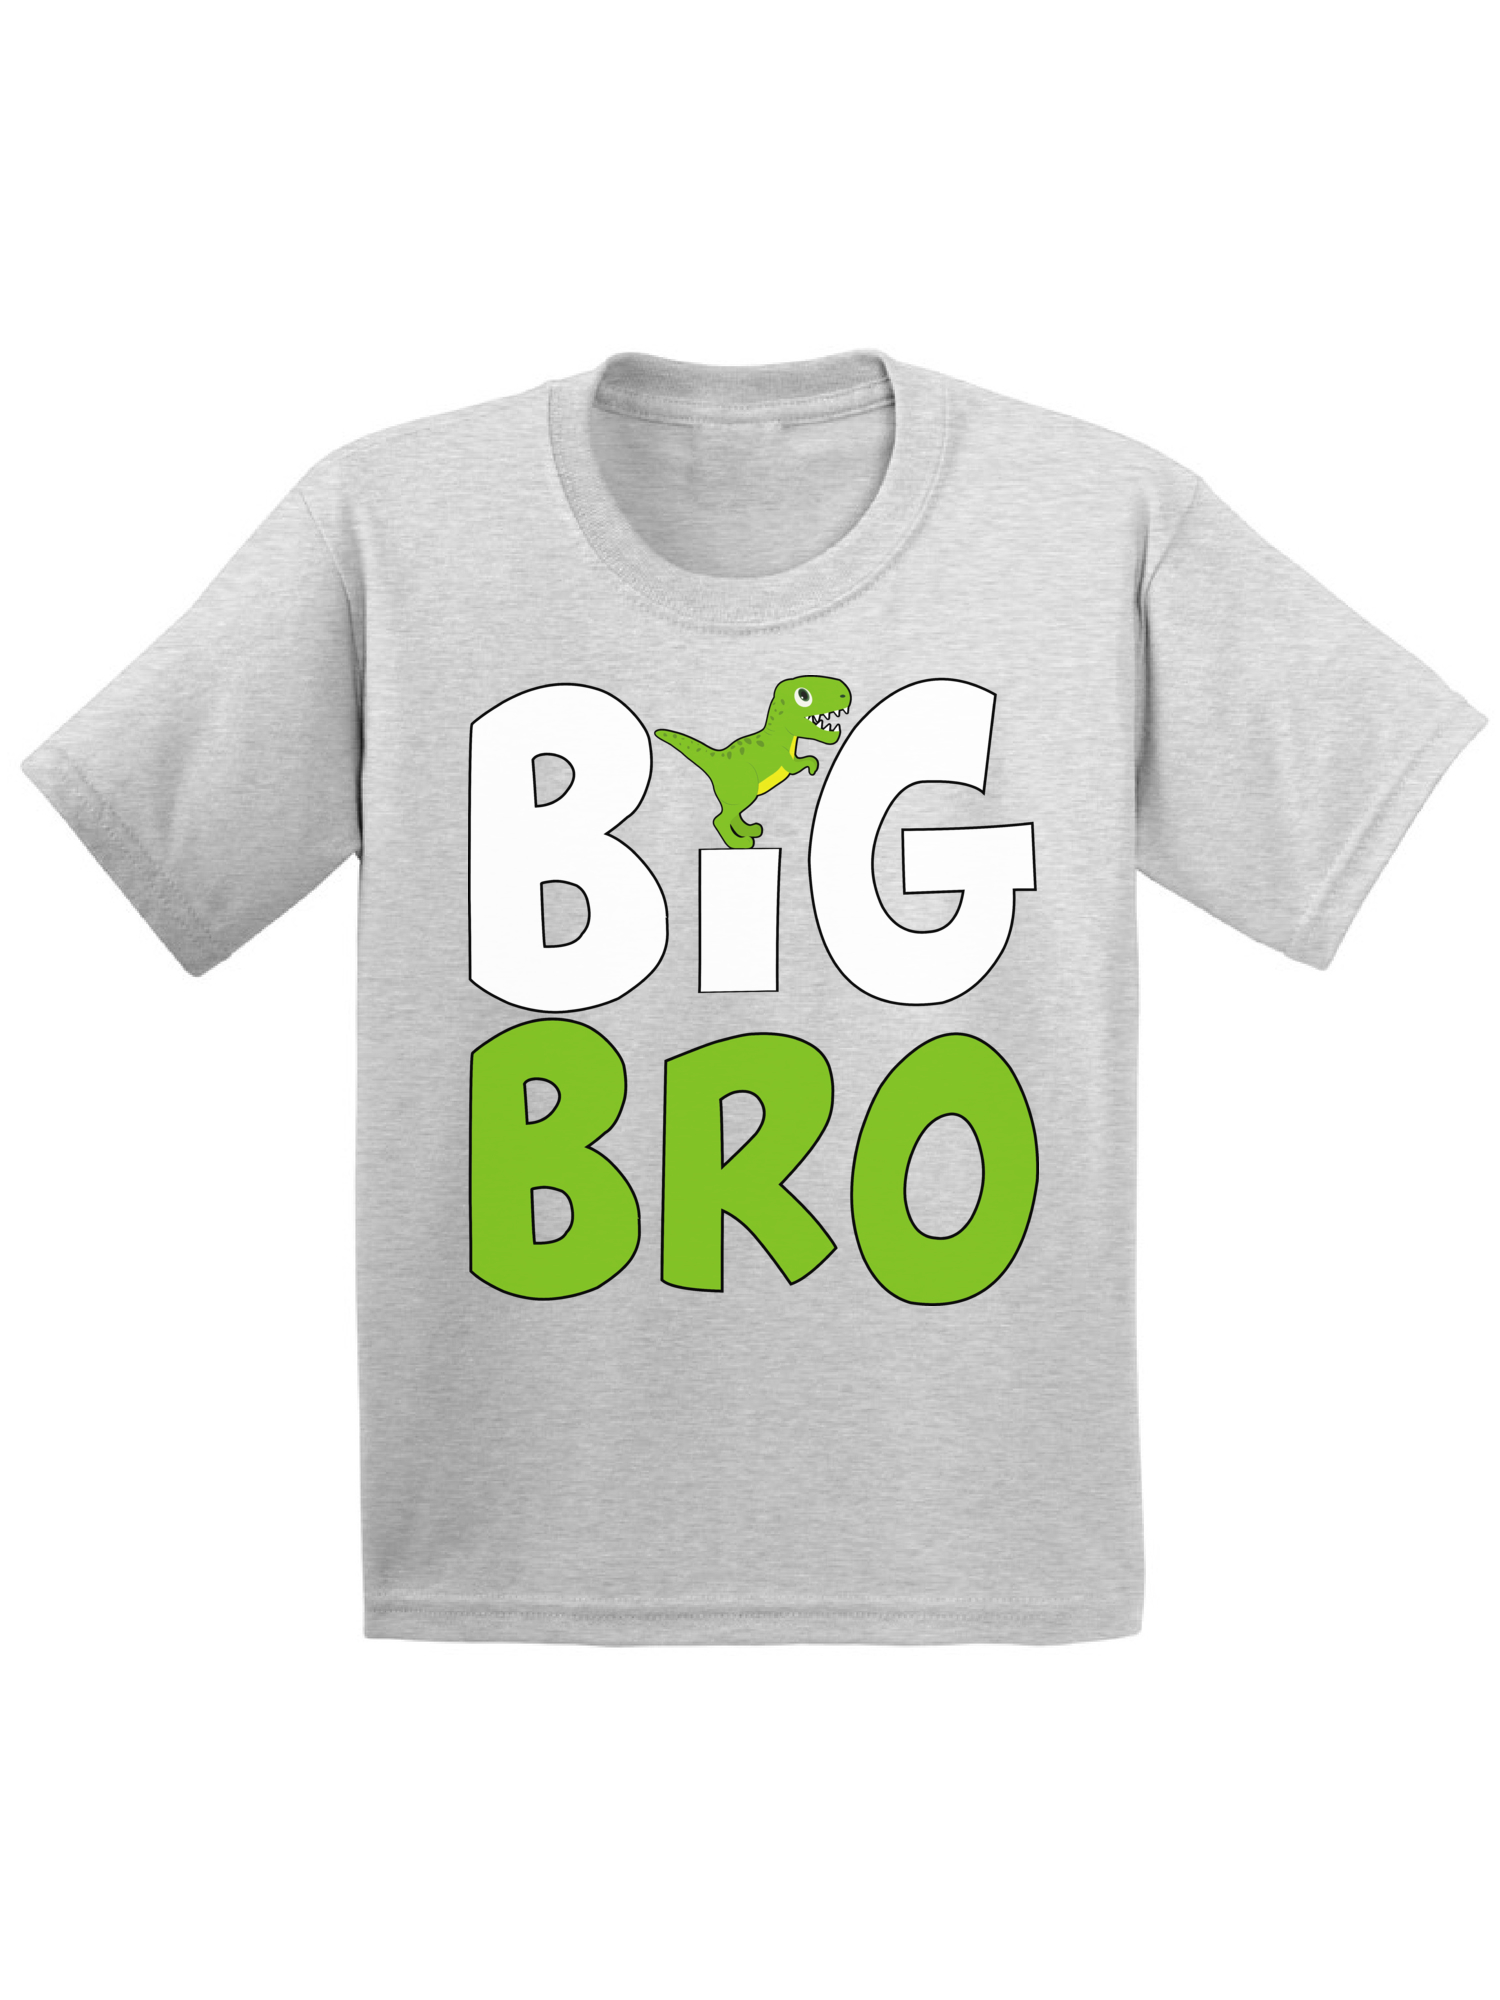 Awkward Styles Dinosaur Clothing Big Brother Shirt Pregnancy Reveal Youth Shirt for Boys Baby Announcement Collection Dinosaur Youth Shirt Dino Shirt for Boys Big Bro T-Shirt T Rex Shirts for Boys - image 1 of 4